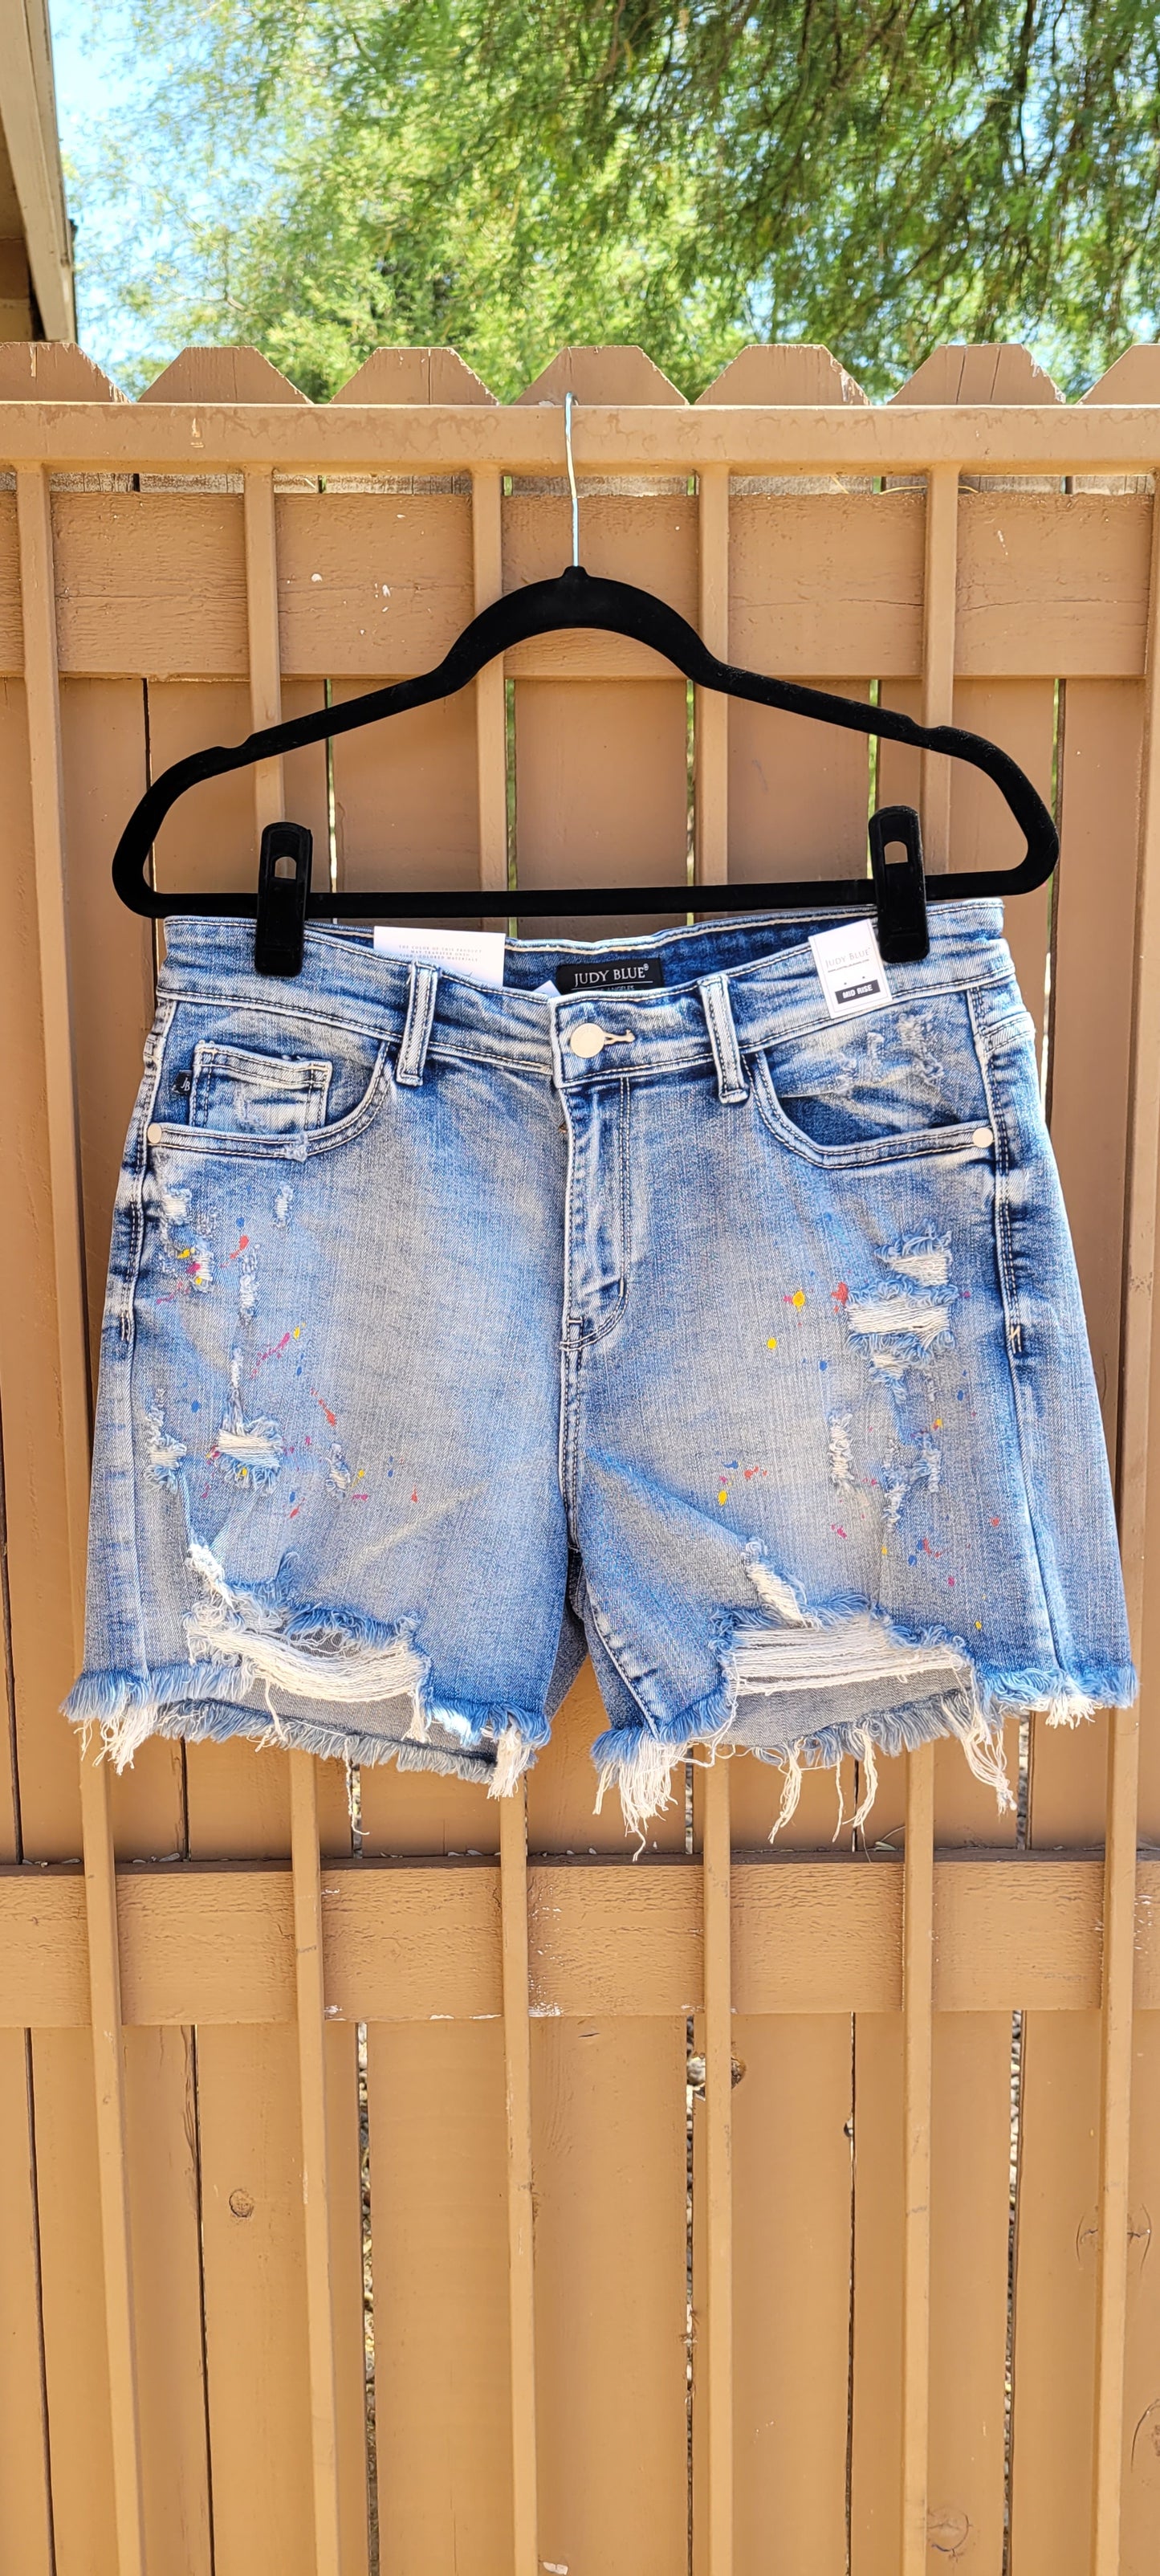 These are mid rise, light wash, distressed shorts featuring paint splatter (blue, yellow, pink), a frayed and distressed hemline, functional pockets in the front and back.  These shorts are stretchy for comfort. Sizes small through x-large.